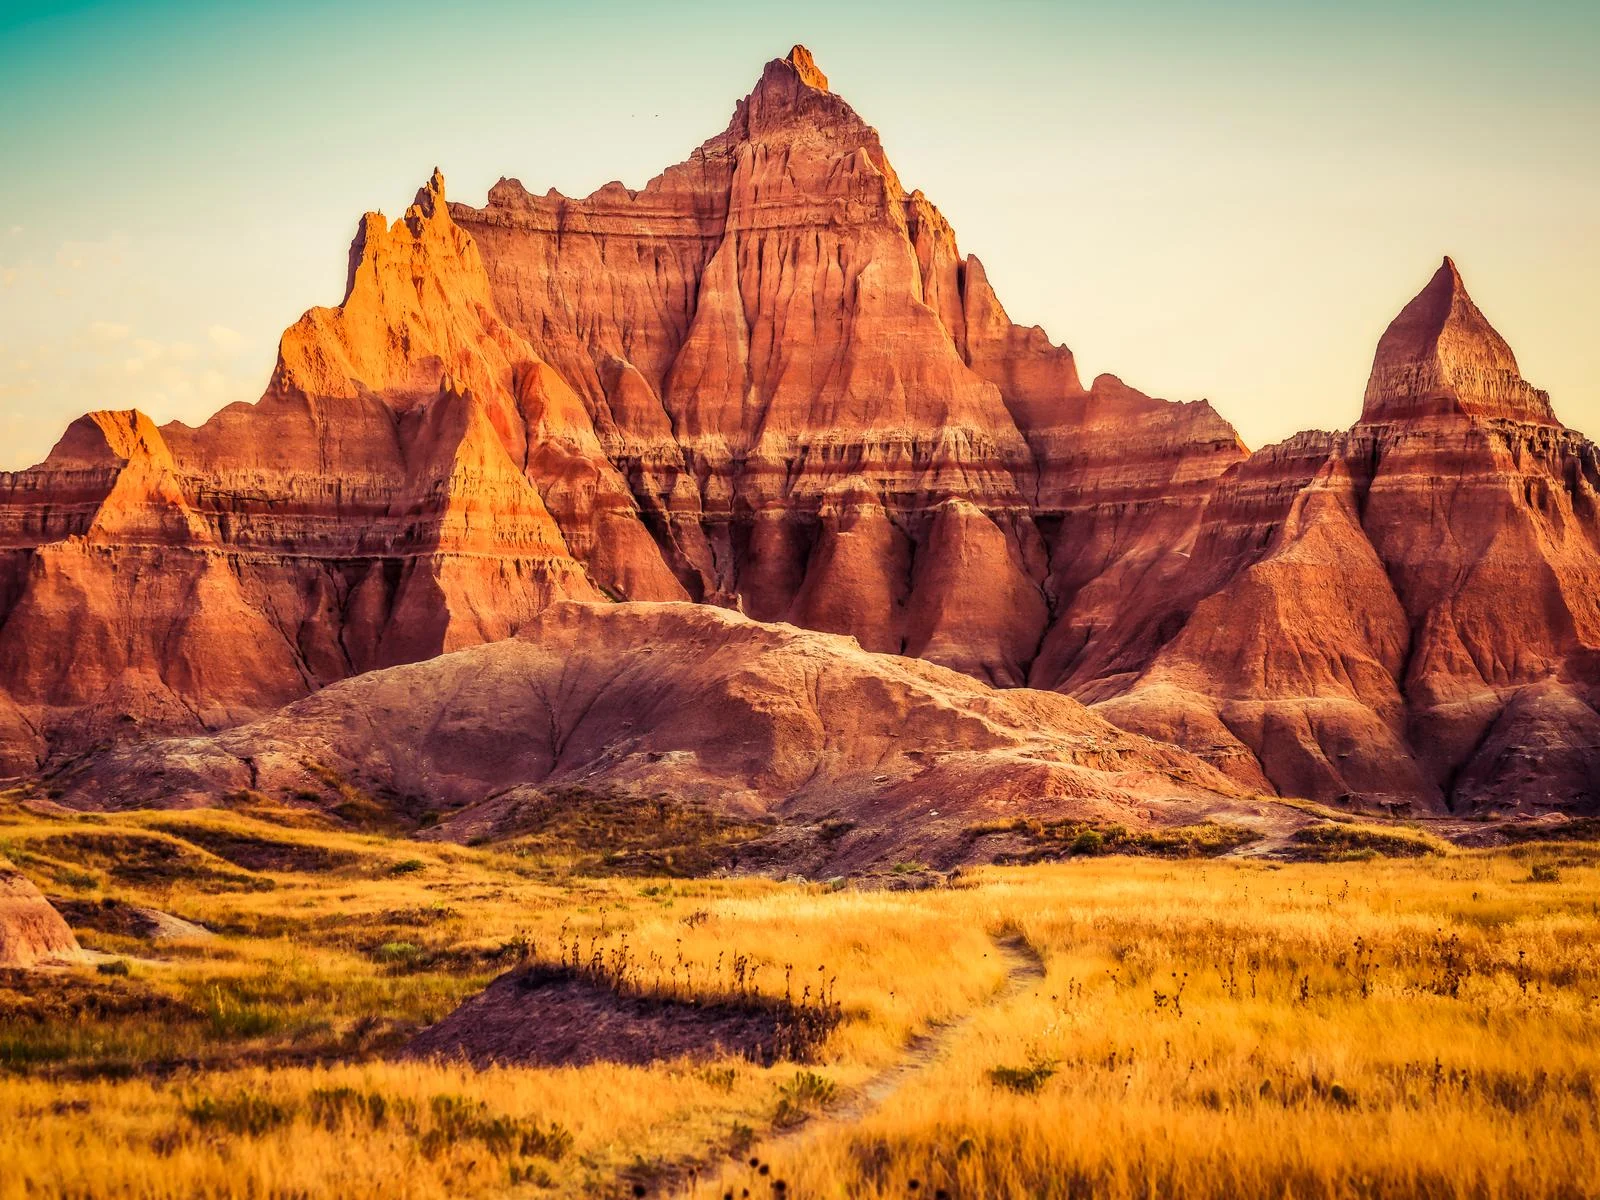 Sunset over a beautiful landscape at Badlands National Park in South Dakota, considered one of the most beautiful places in the US, with a pasture at its foot